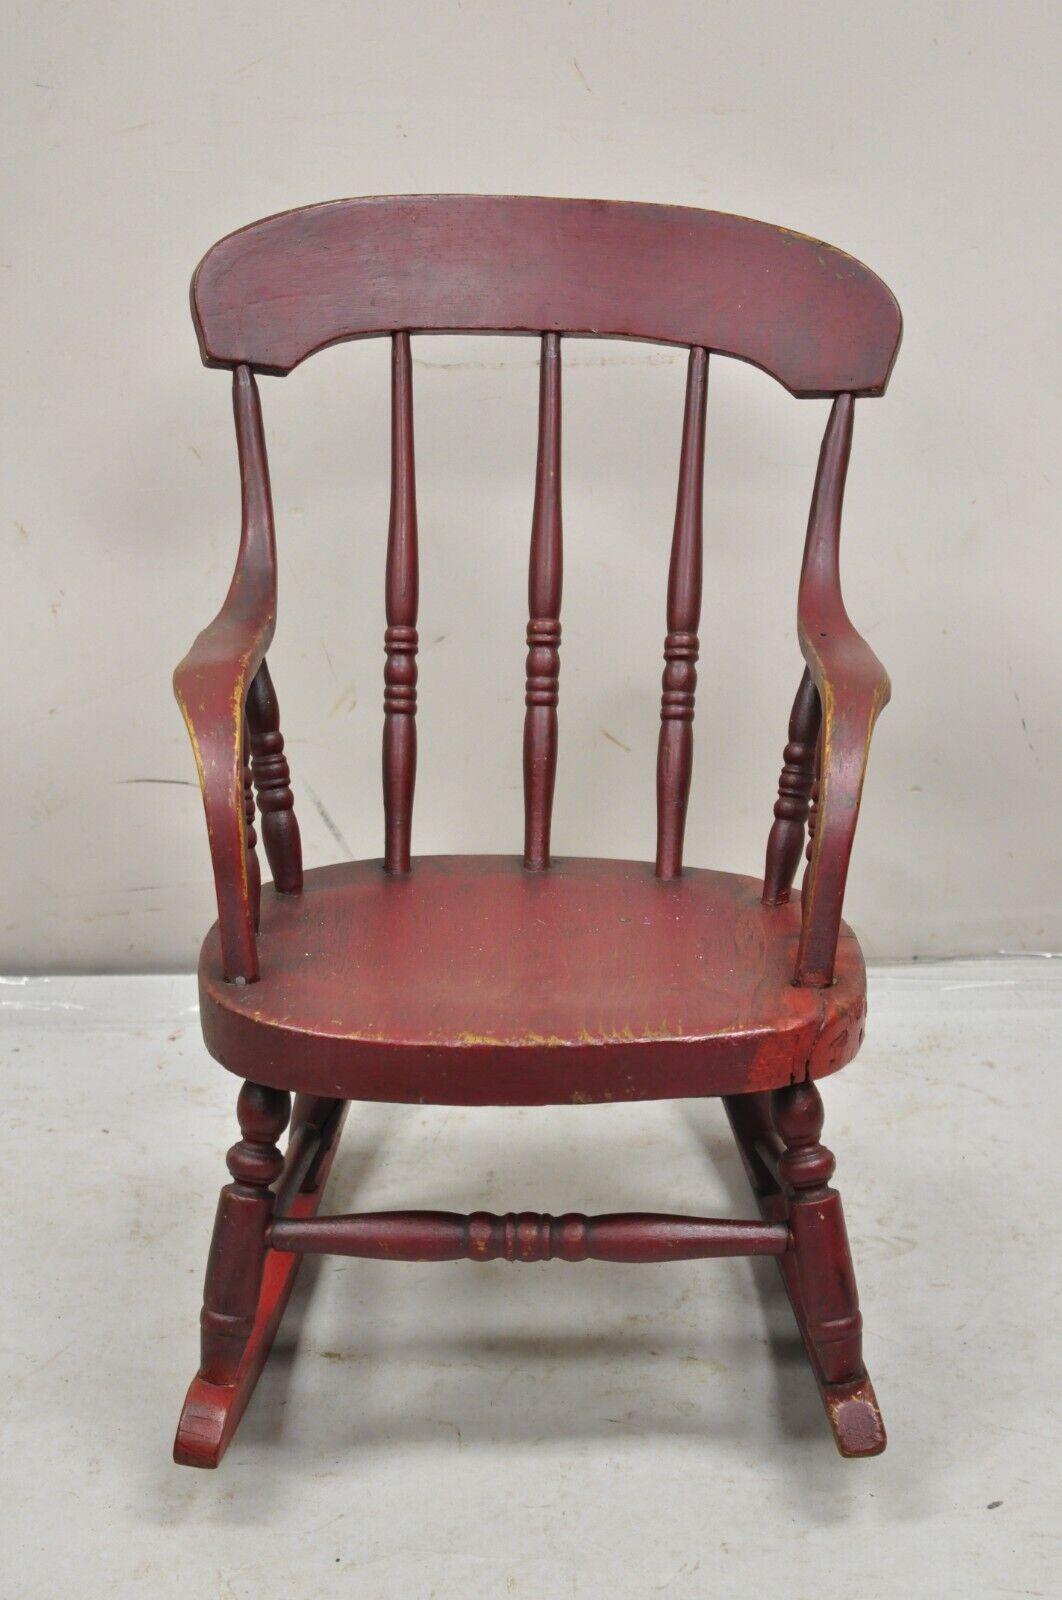 Antique American Red Painted Primitive Spindle Back Small Child's Rocker Rocking Chair. Circa 19th Century. Measurements: 21